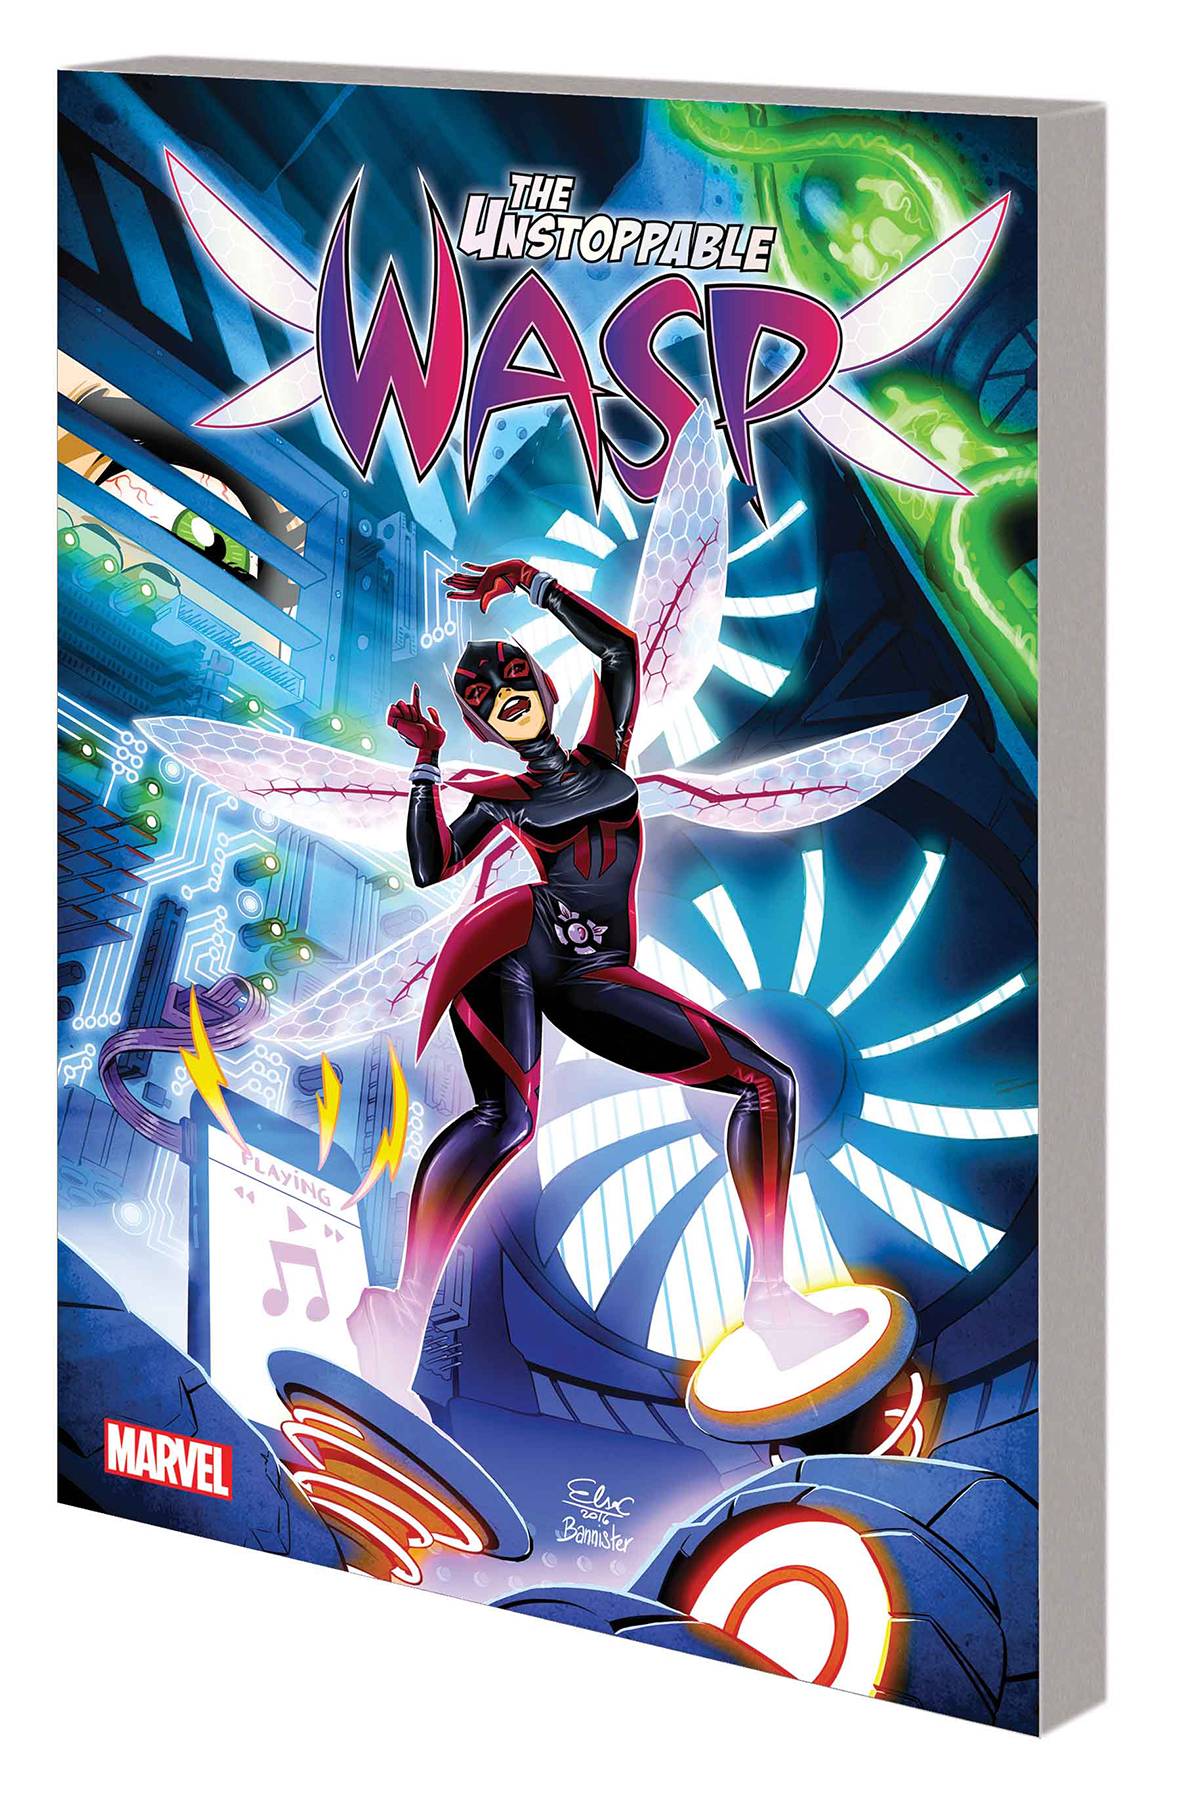 The Unstoppable Wasp Vol. 1 TP